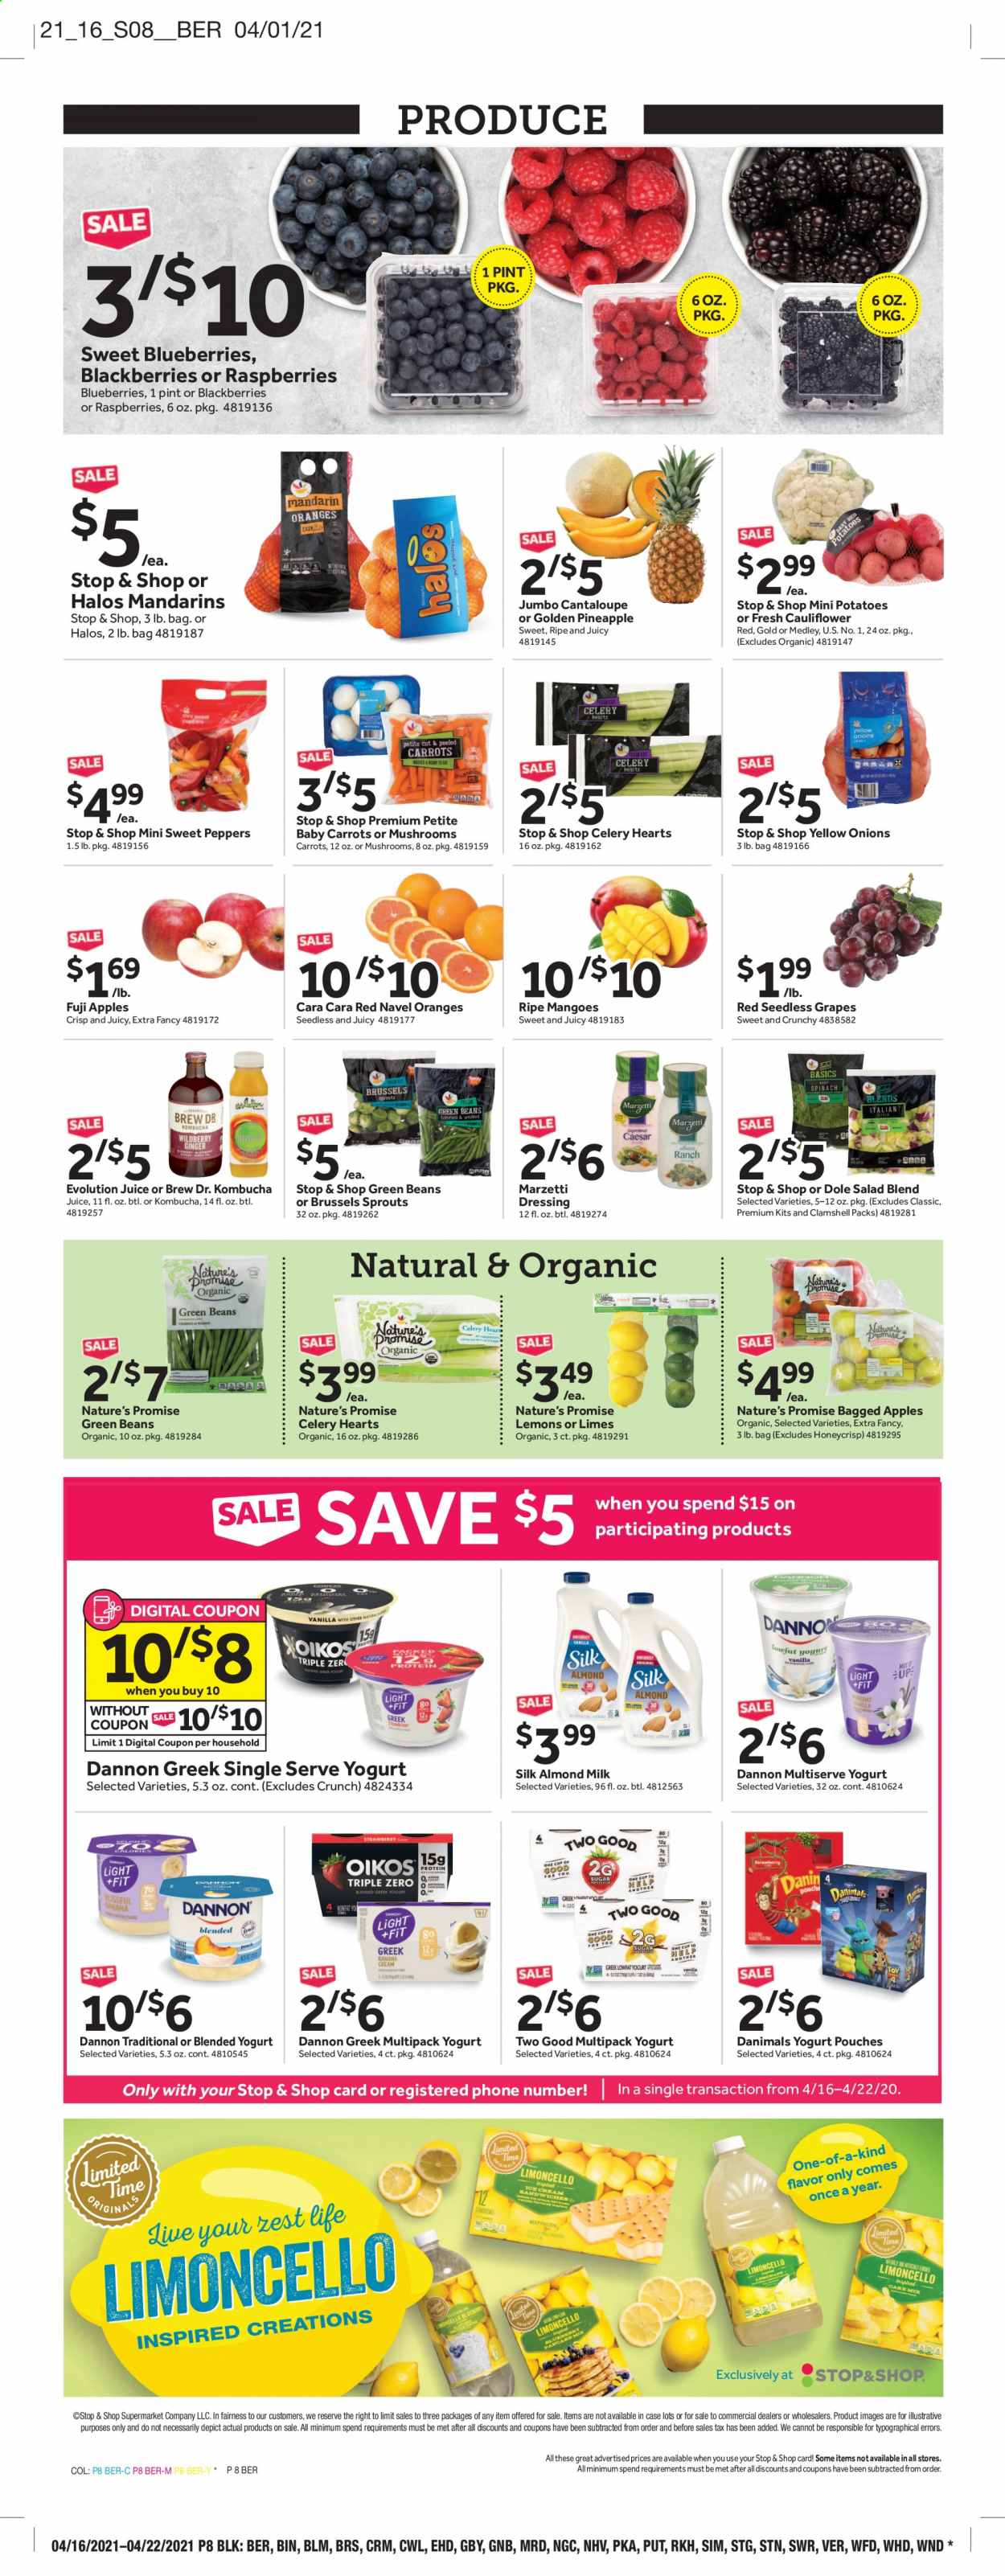 thumbnail - Stop & Shop Flyer - 04/16/2021 - 04/22/2021 - Sales products - mushrooms, seedless grapes, Nature’s Promise, beans, cantaloupe, cauliflower, celery, green beans, spinach, sweet peppers, potatoes, onion, salad, Dole, peppers, brussel sprouts, sleeved celery, apples, blackberries, blueberries, grapes, limes, mandarines, mango, raspberries, oranges, Fuji apple, yoghurt, Oikos, Dannon, Danimals, almond milk, sugar, dressing, juice, kombucha, Limoncello, pineapple, lemons, navel oranges. Page 7.